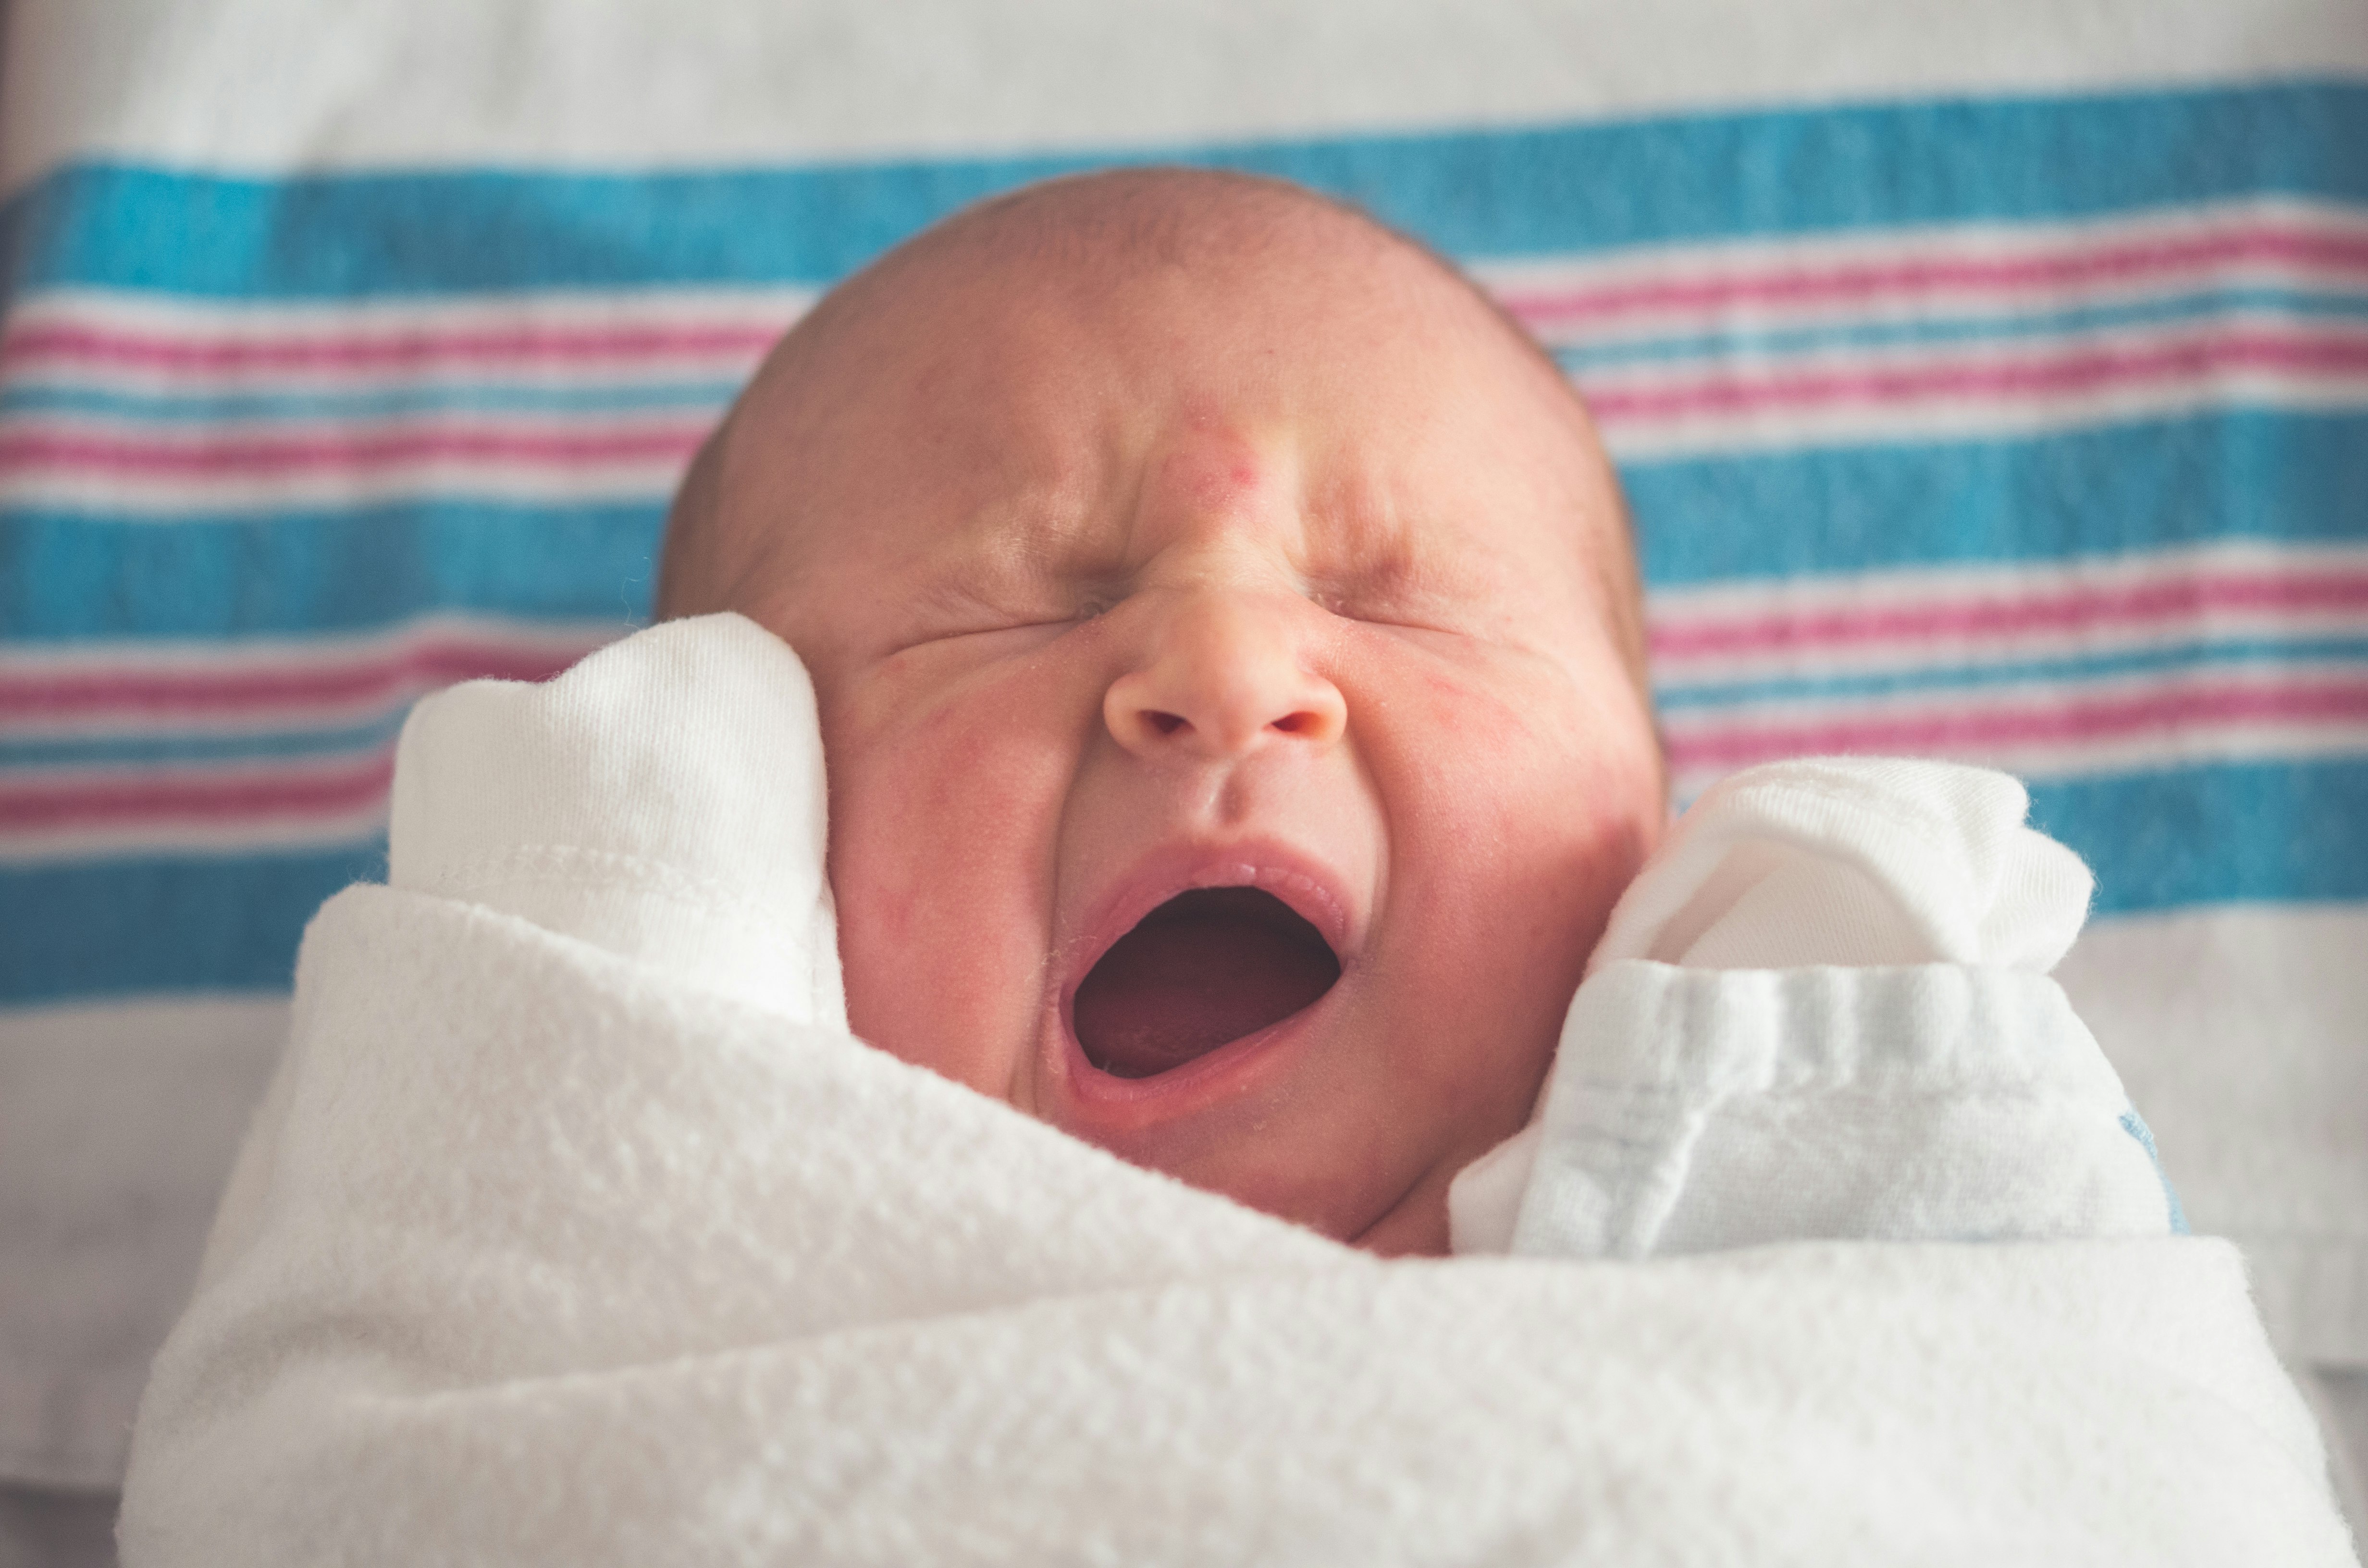 My newest daughter, we have 4, was just about a day old when I caught this cute image of her yawning. Being born is apparently hard work!